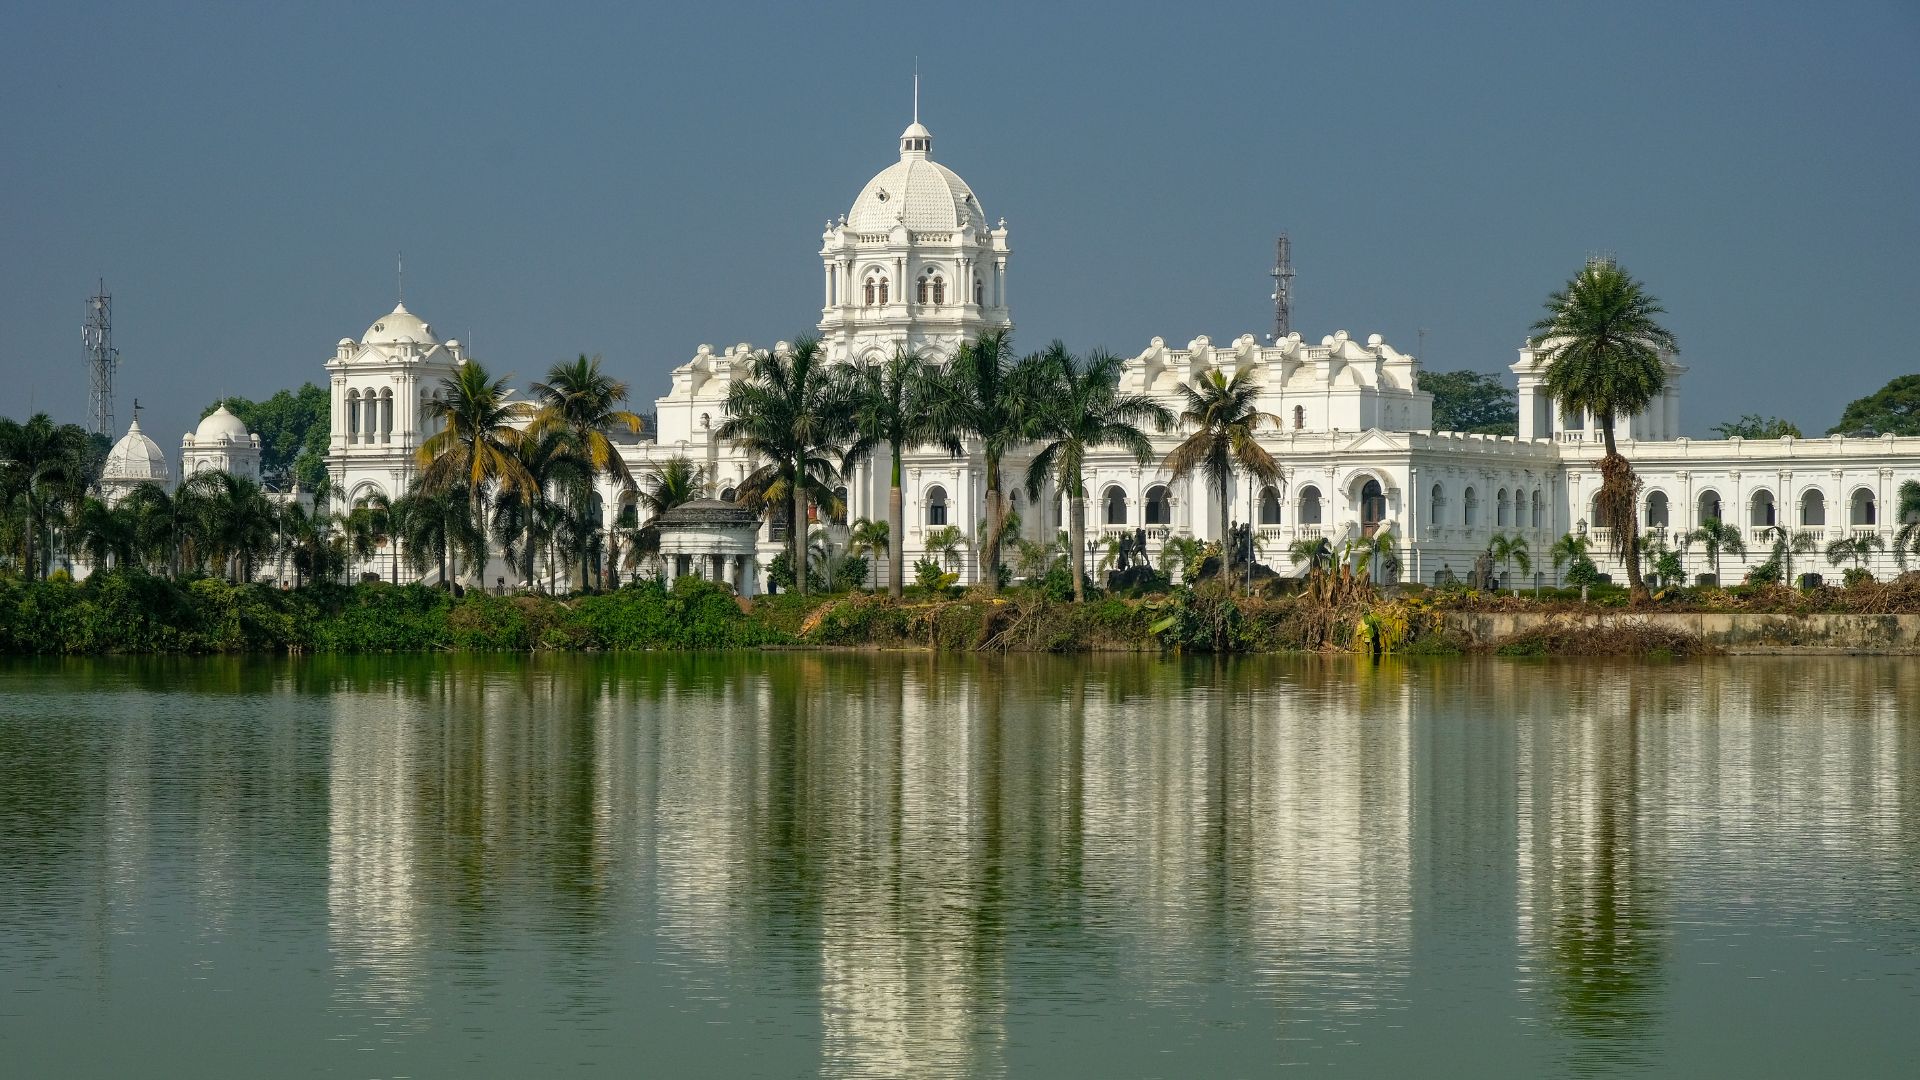 Agartala Pin codes, History, Culture, Places to Visit, Food